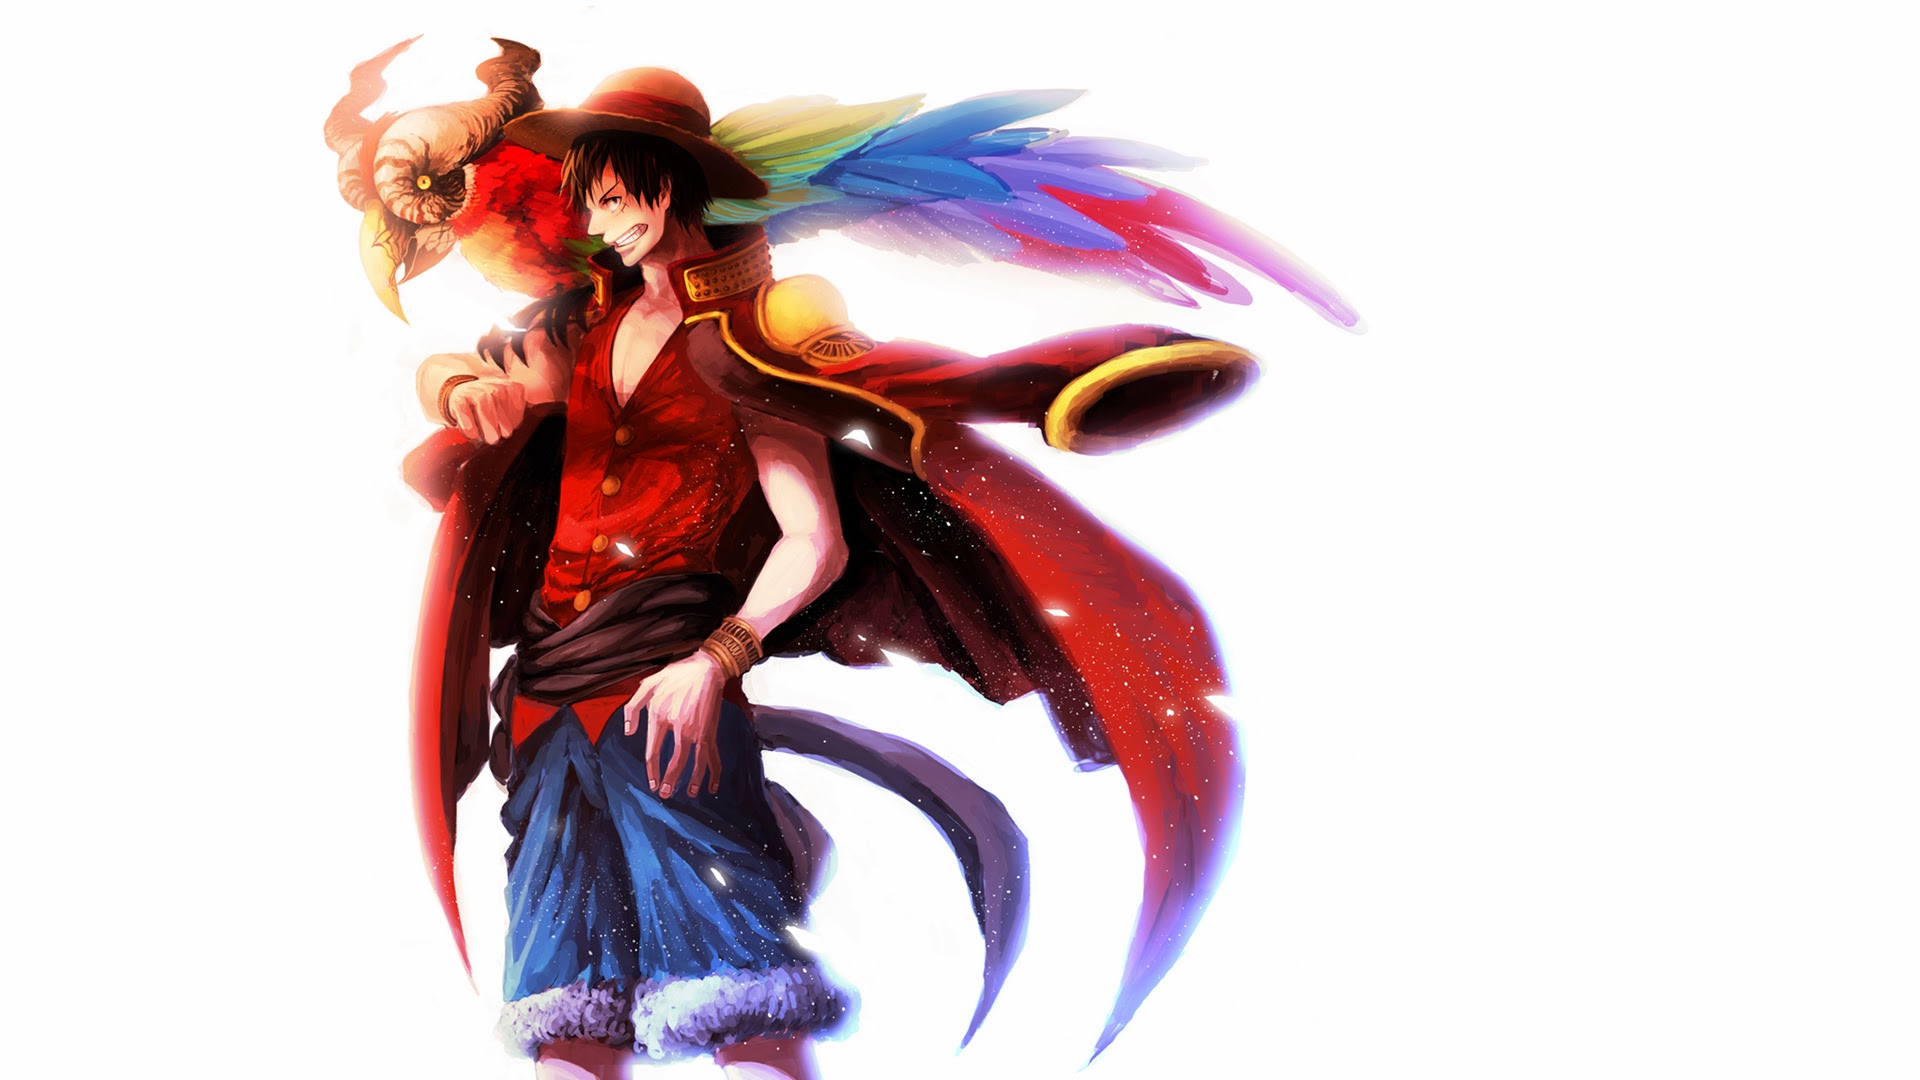 pirate king luffy one piece anime hd wallpaper 1920x1080 2a